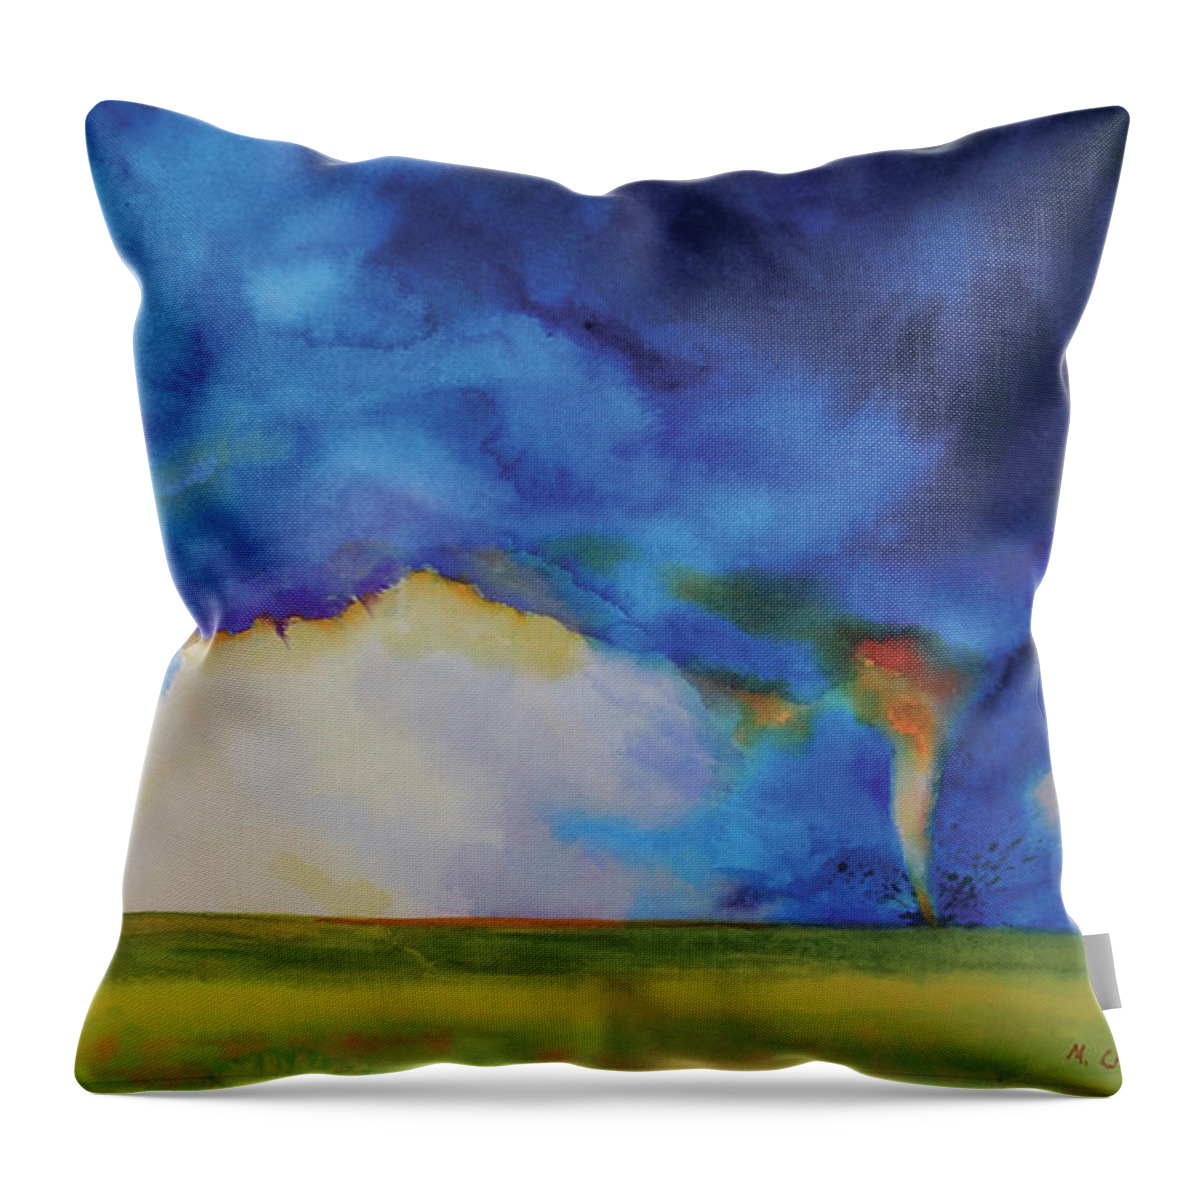 Tornado Throw Pillow featuring the painting Twist of Fate by Marguerite Chadwick-Juner